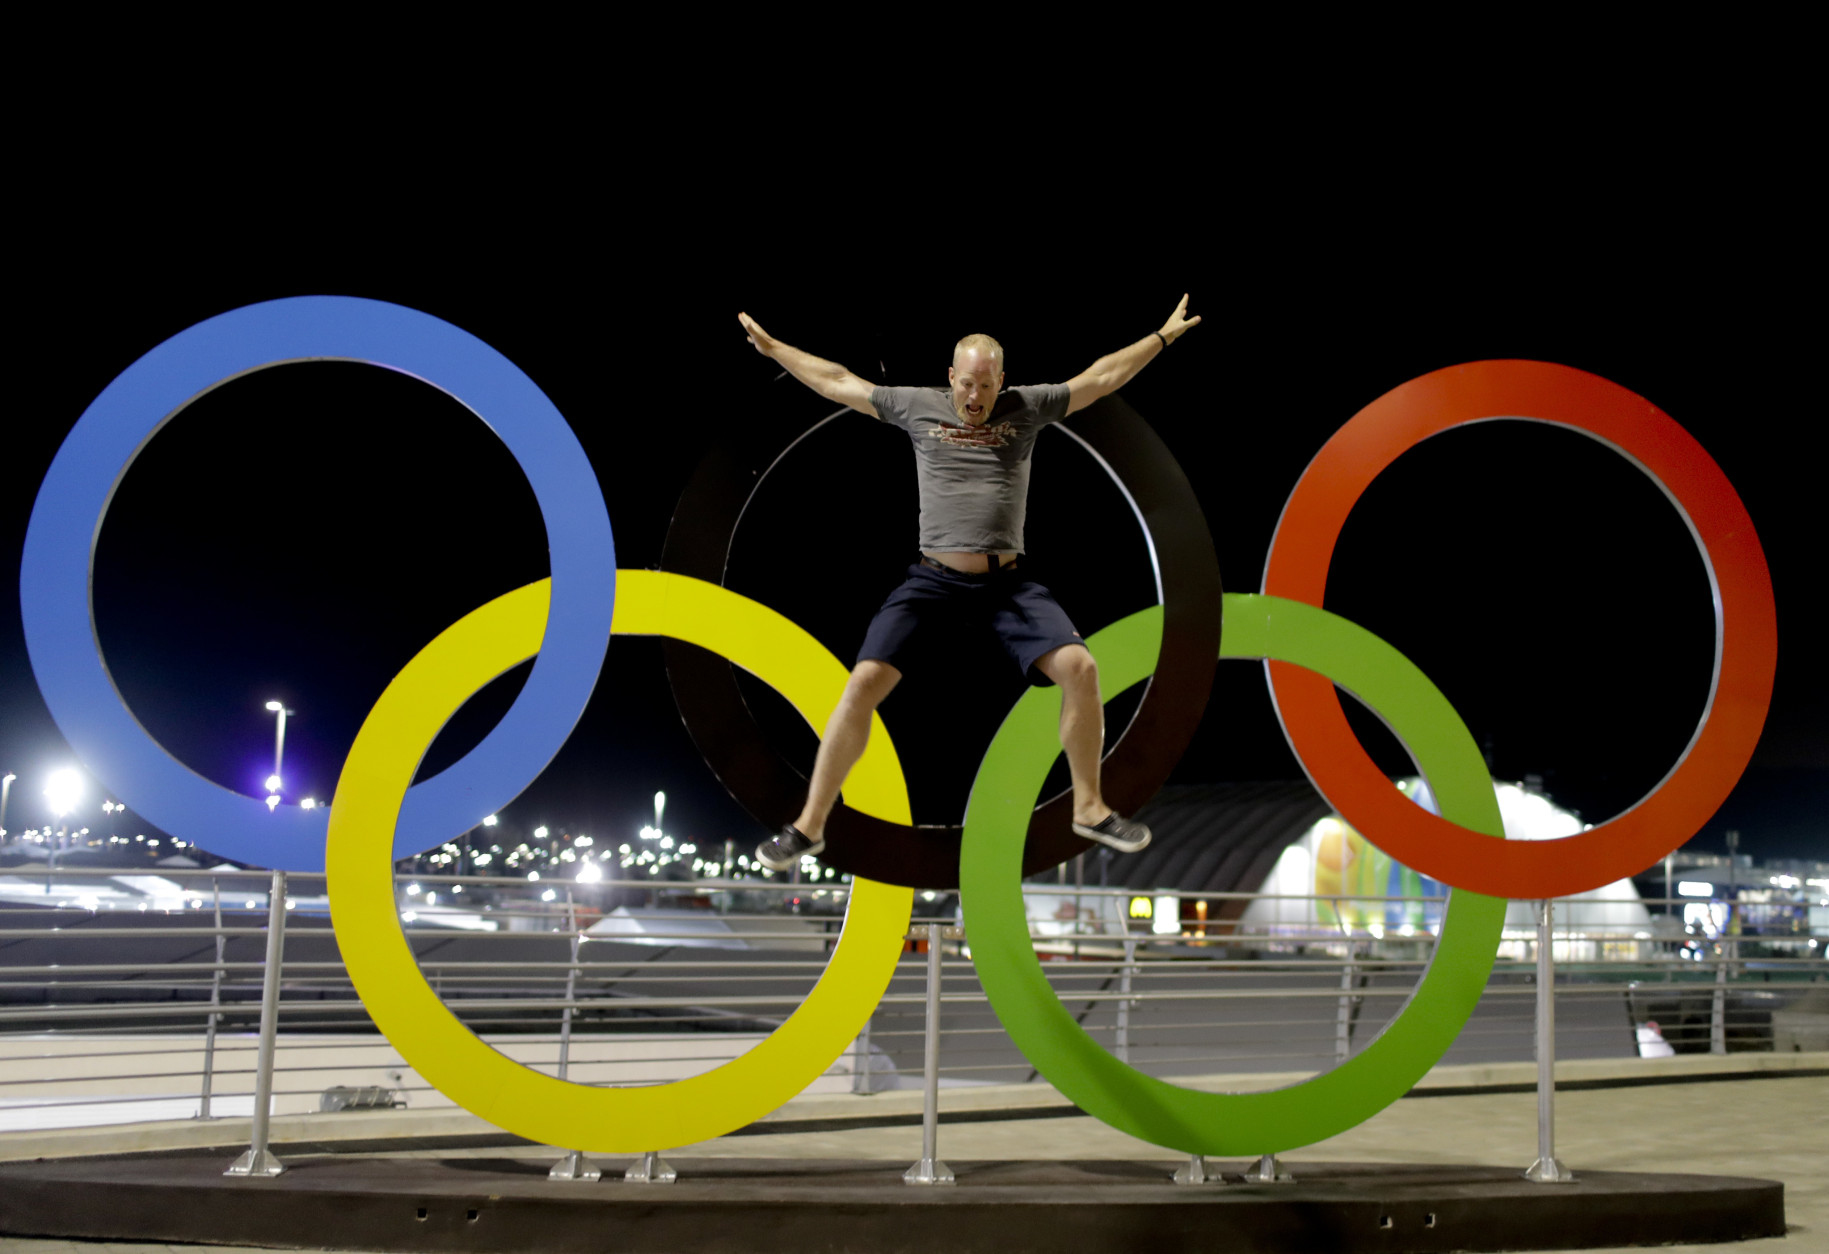 Adam Kreek jumps from the Olympic rings, while posing for a video, prior to the Summer Olympics in Rio de Janeiro, Brazil, Wednesday, Aug. 3, 2016. The Games opening ceremony is on Friday.(AP Photo/Natacha Pisarenko)